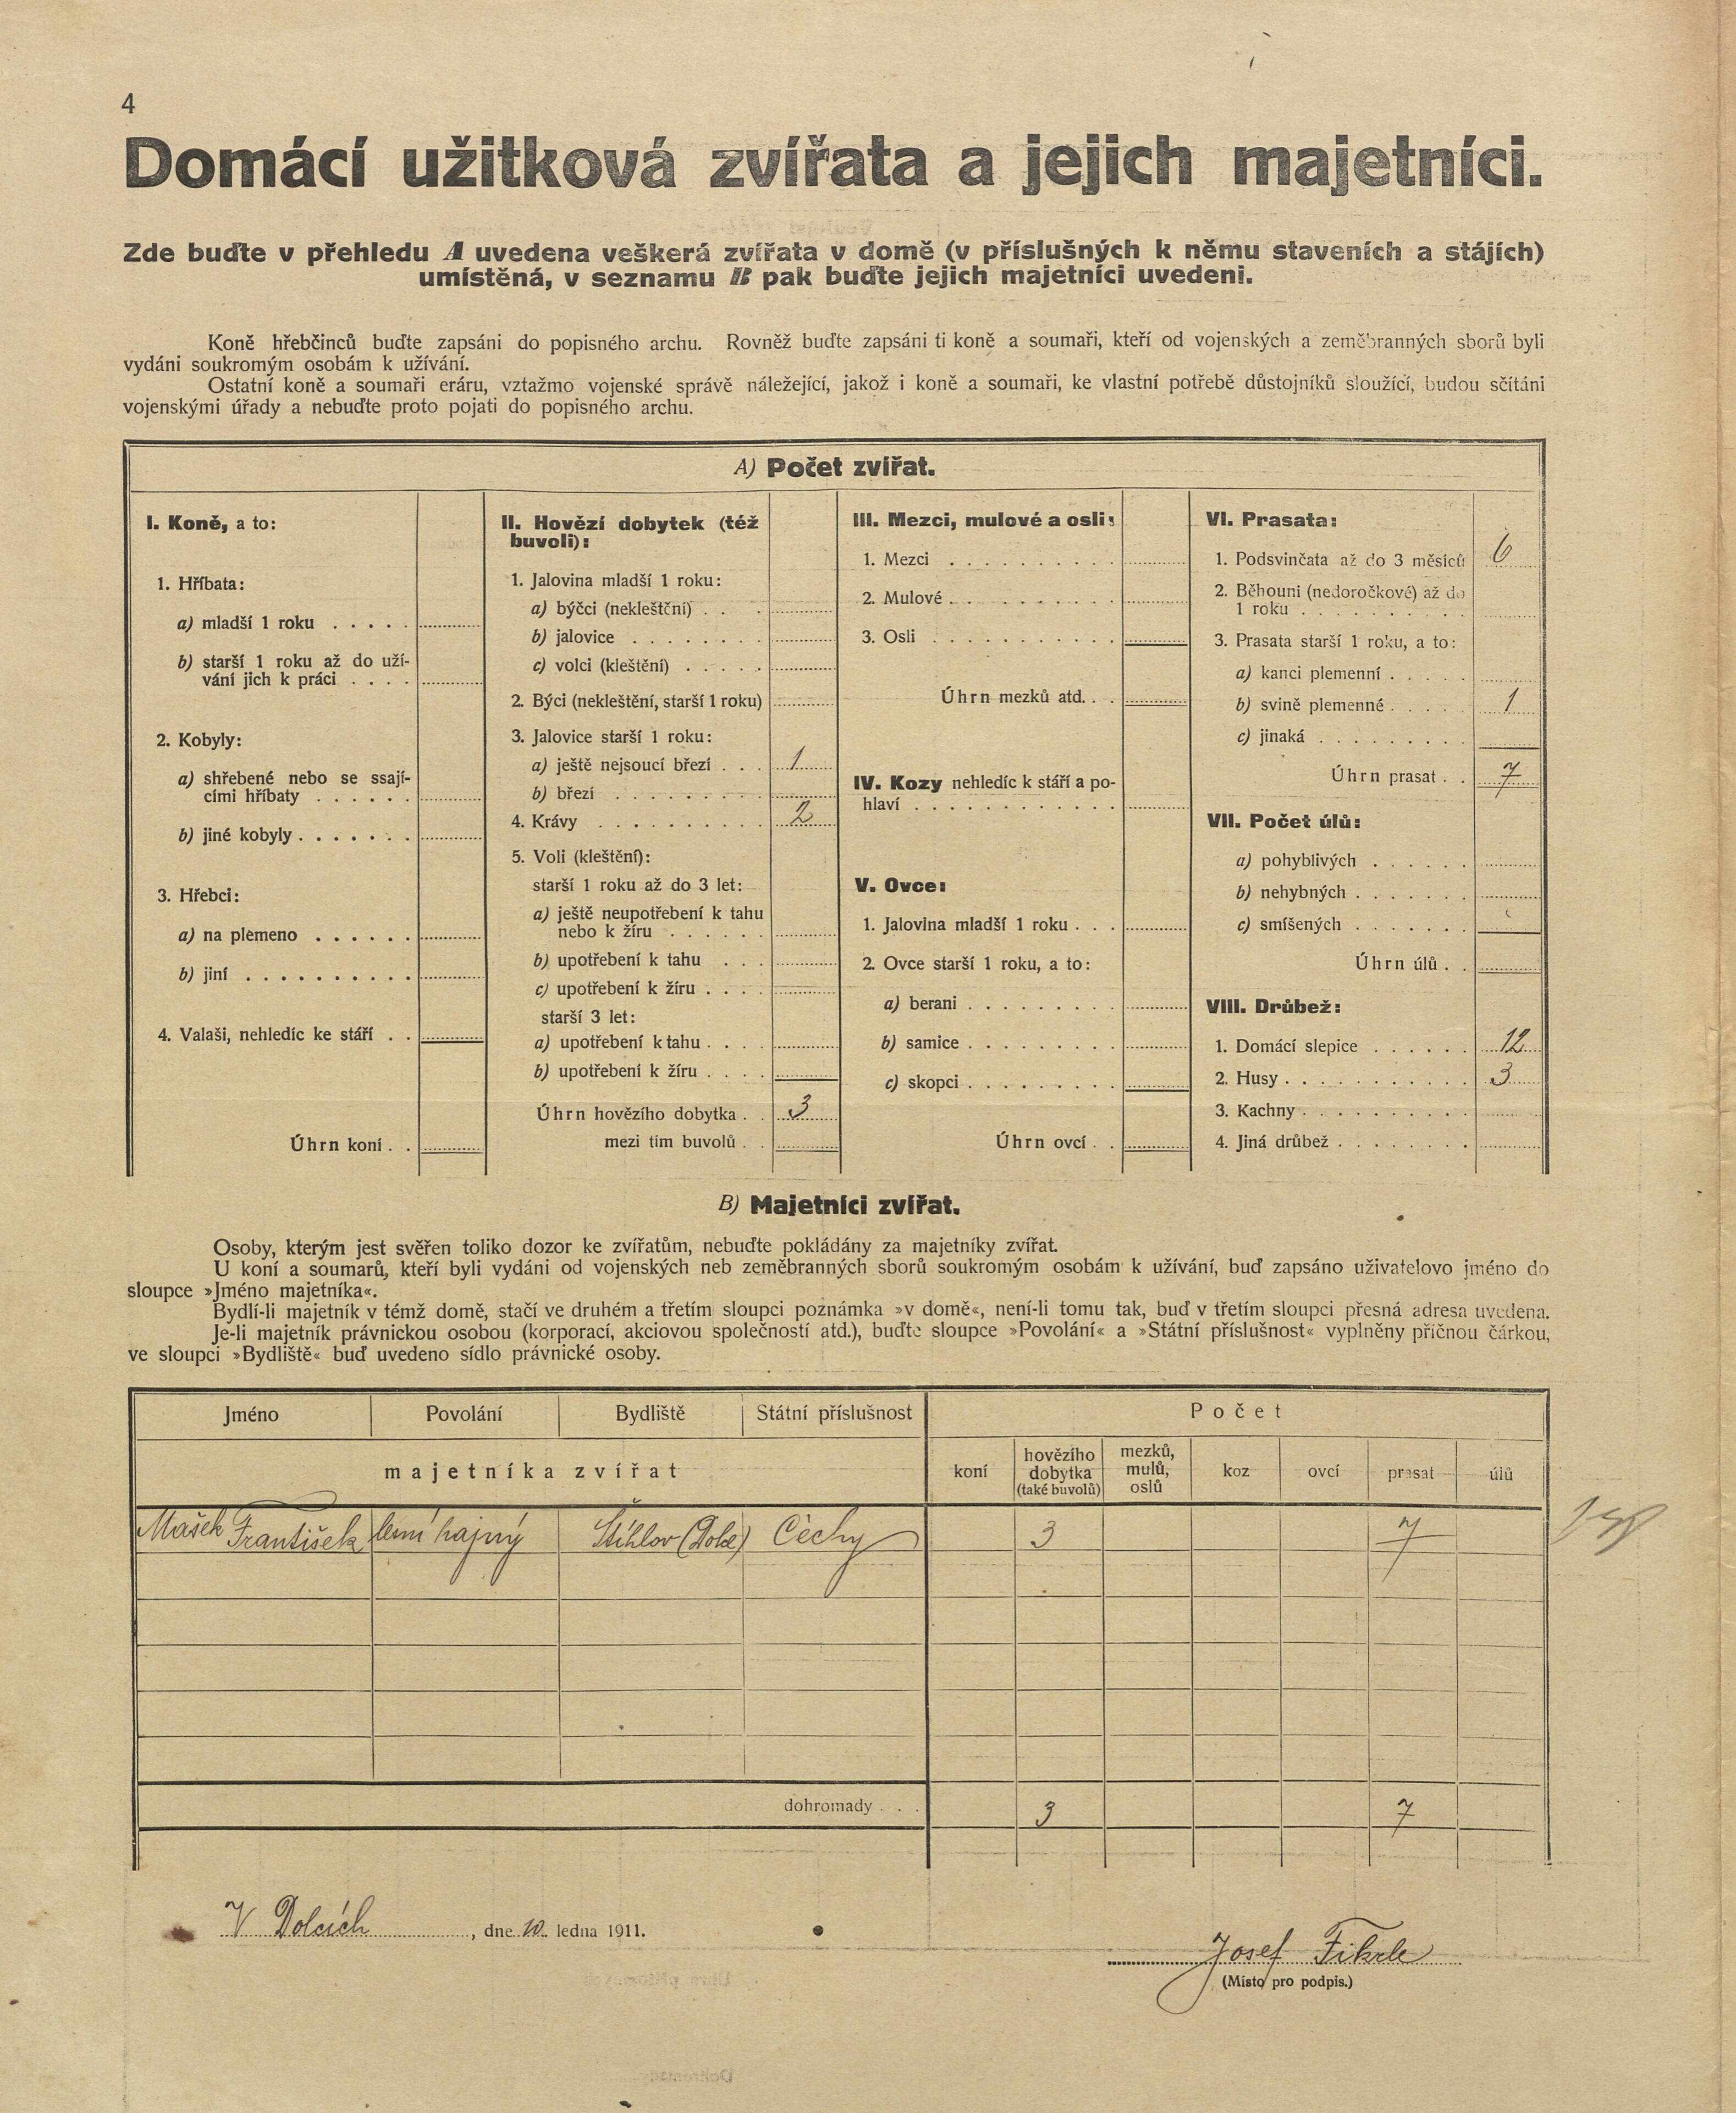 3. soap-pj_00302_census-1910-dolce-cp008_0030